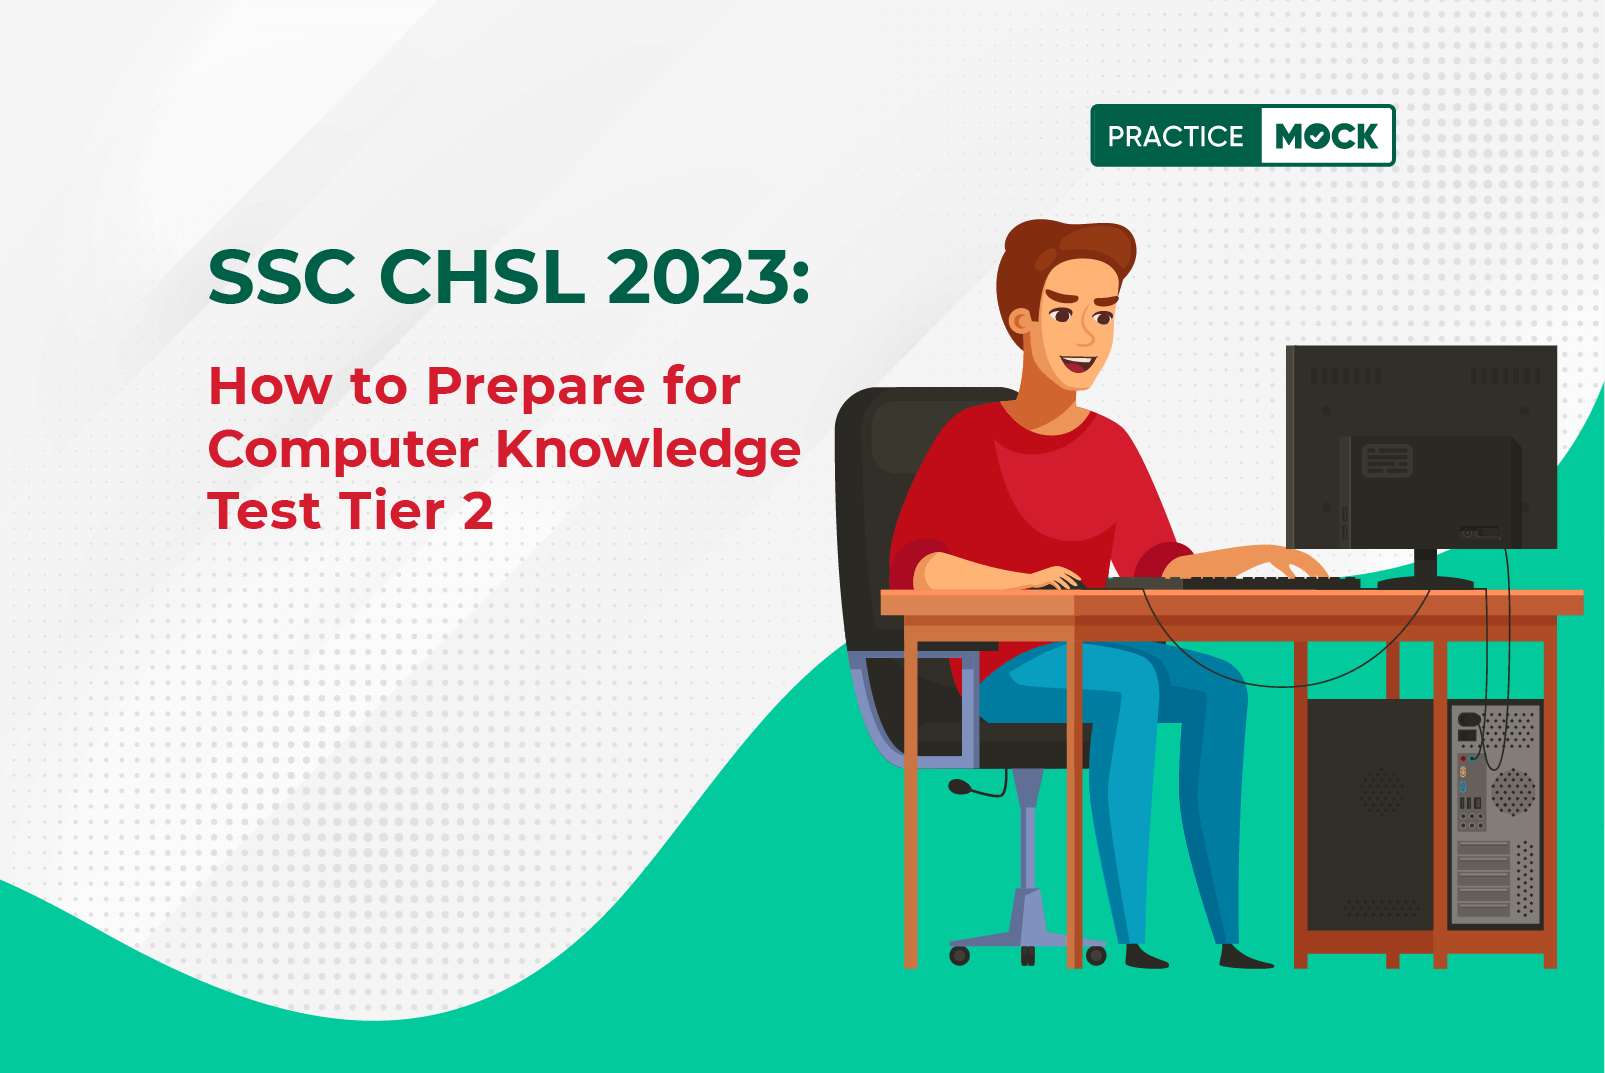 SSC CHSL: How to Prepare for Computer Knowledge Test Tier 2